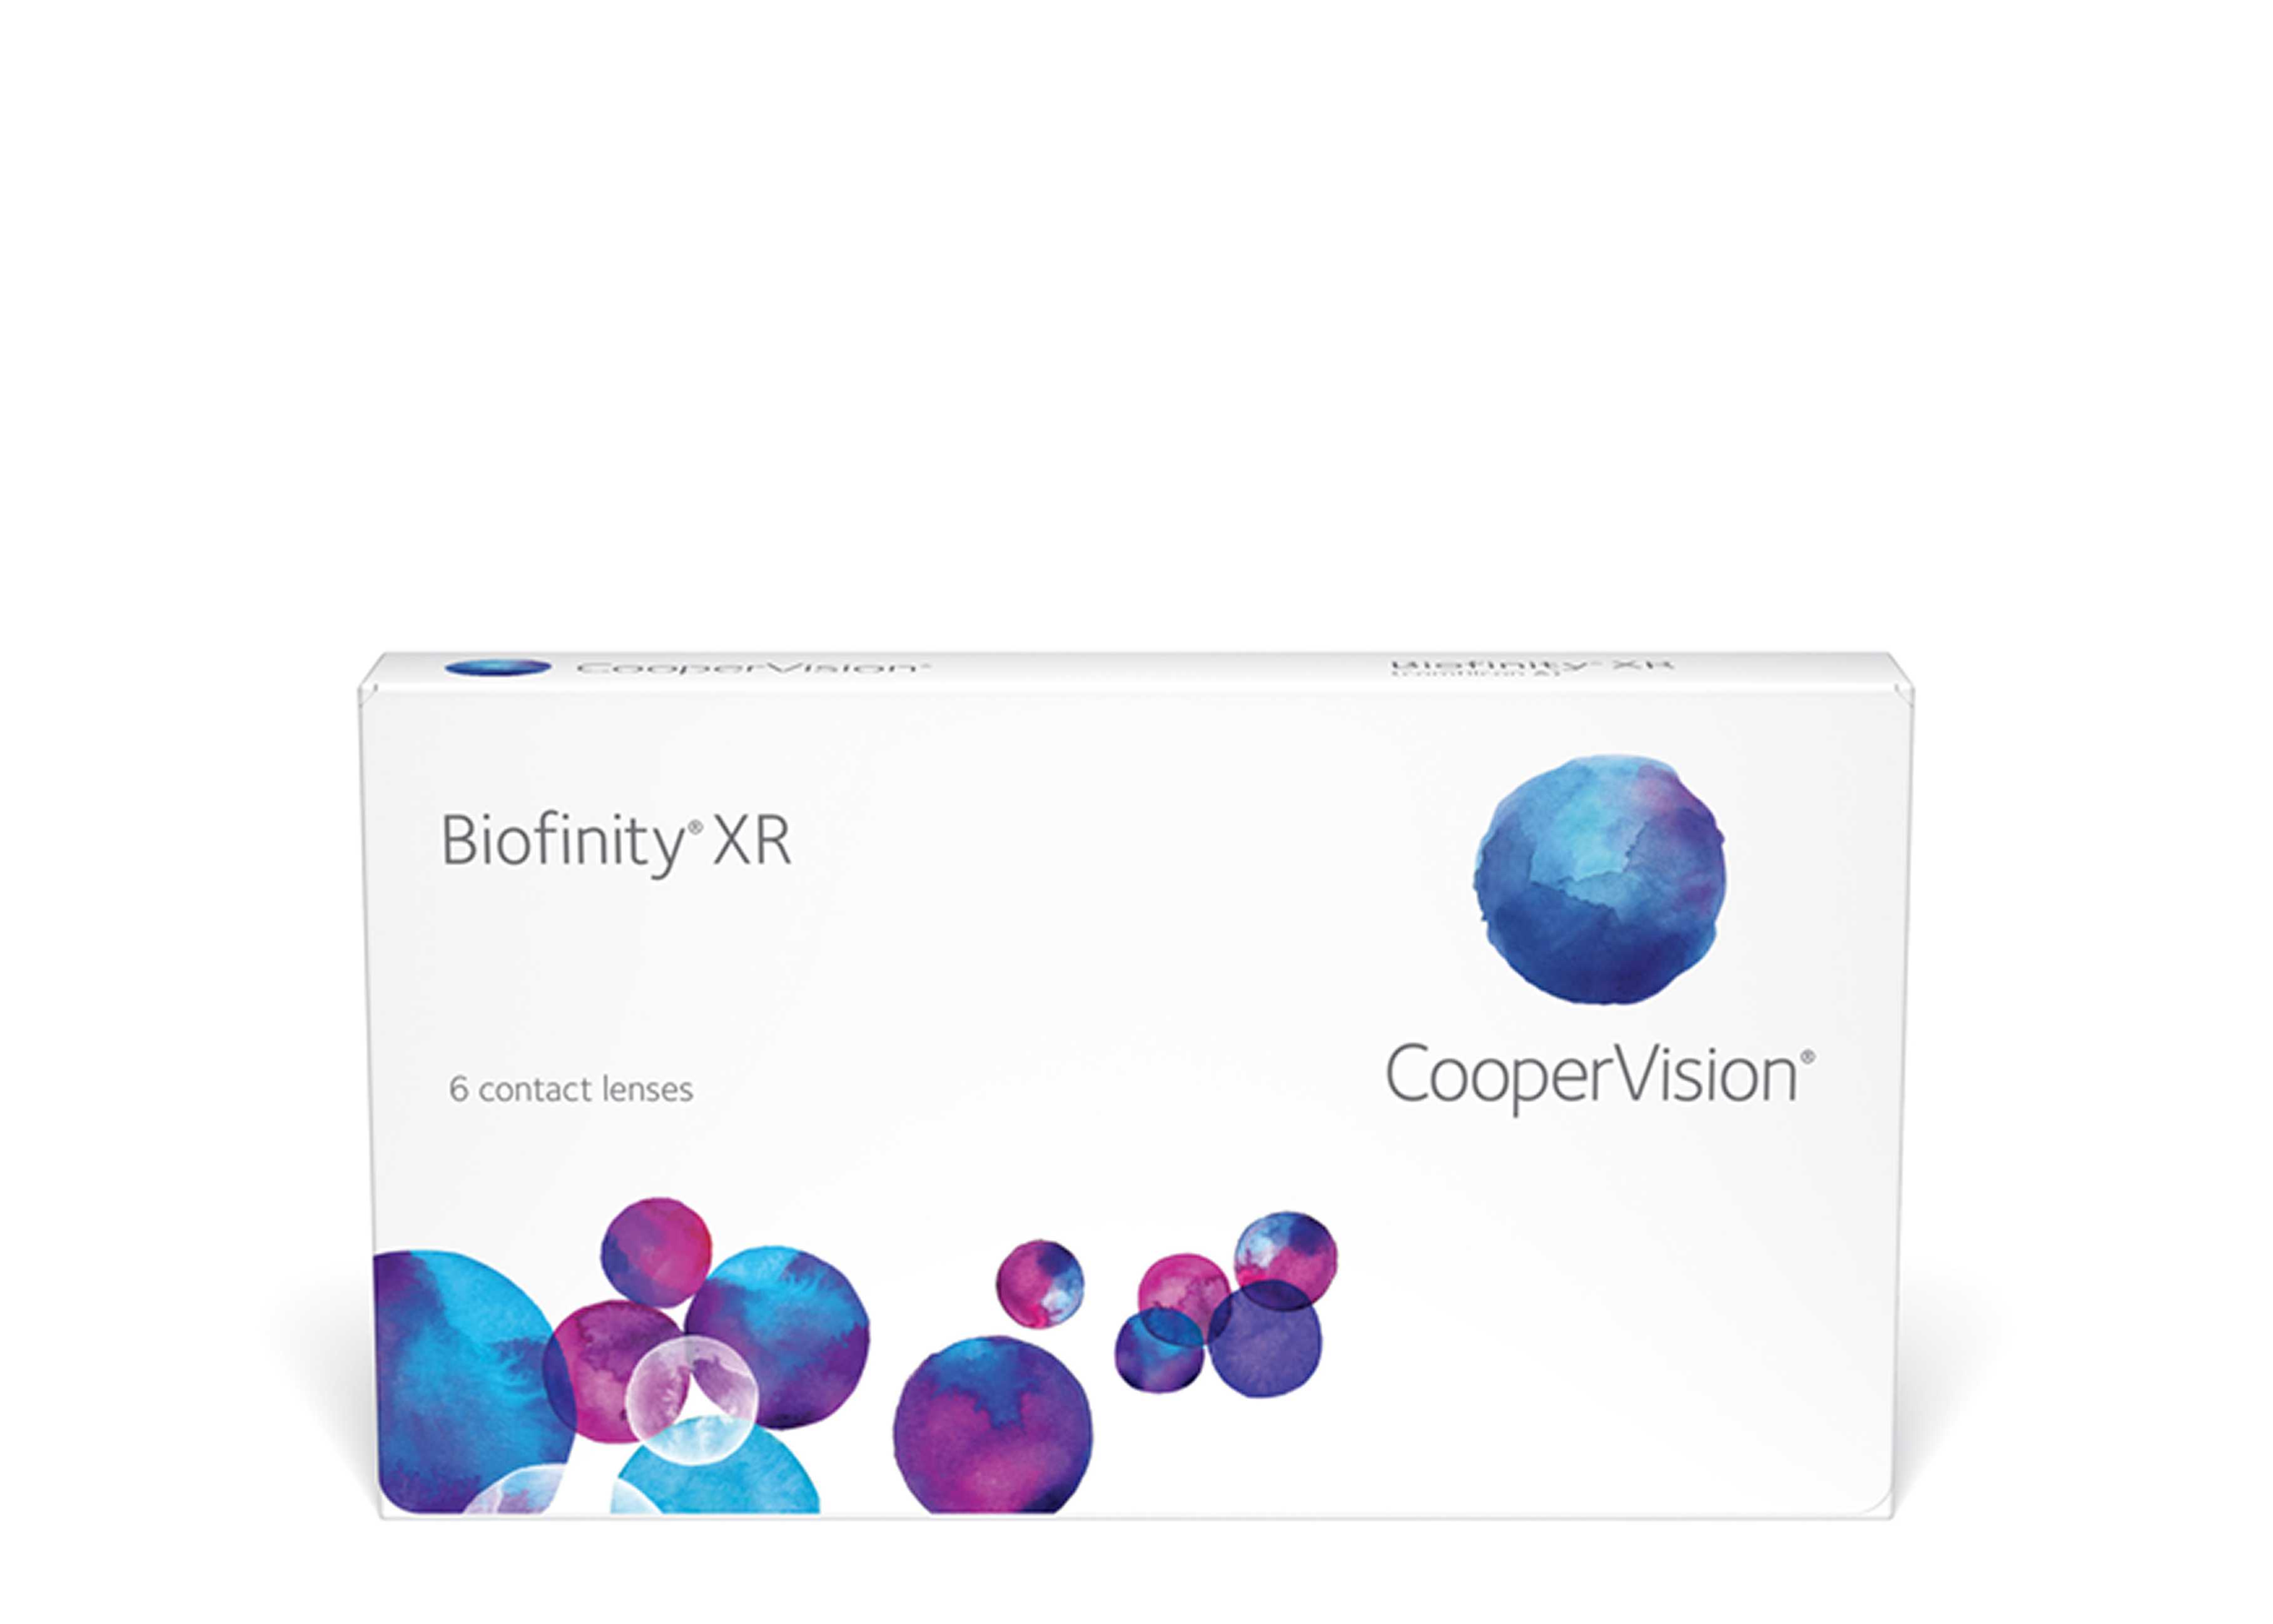  BIOFINITY XR COOPERVISION